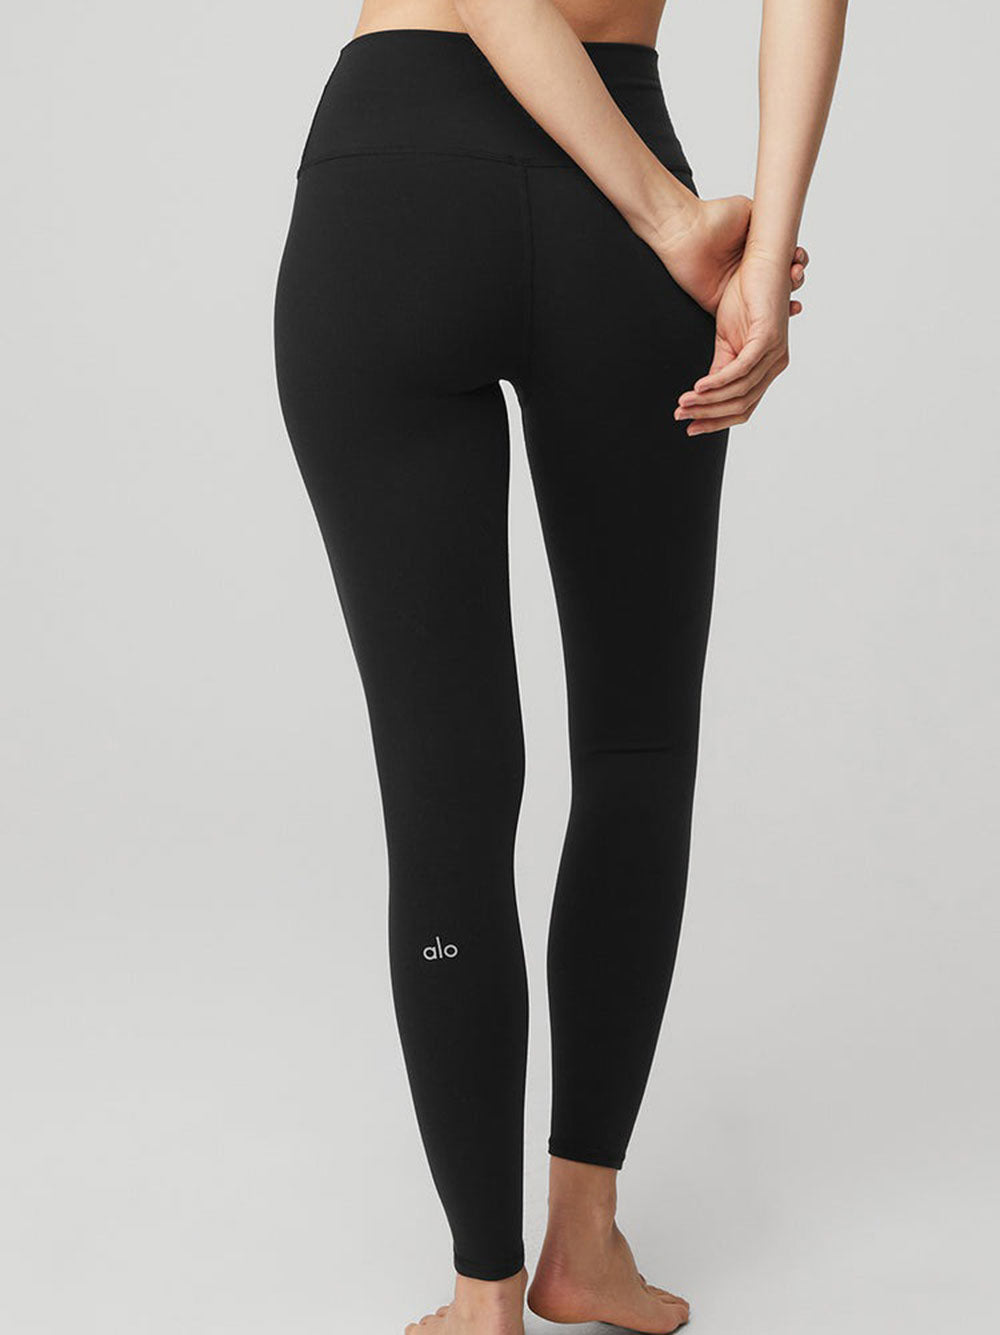 7/8 High-Waist Airbrush Legging in Soft Seagrass by Alo Yoga - Work Well  Daily